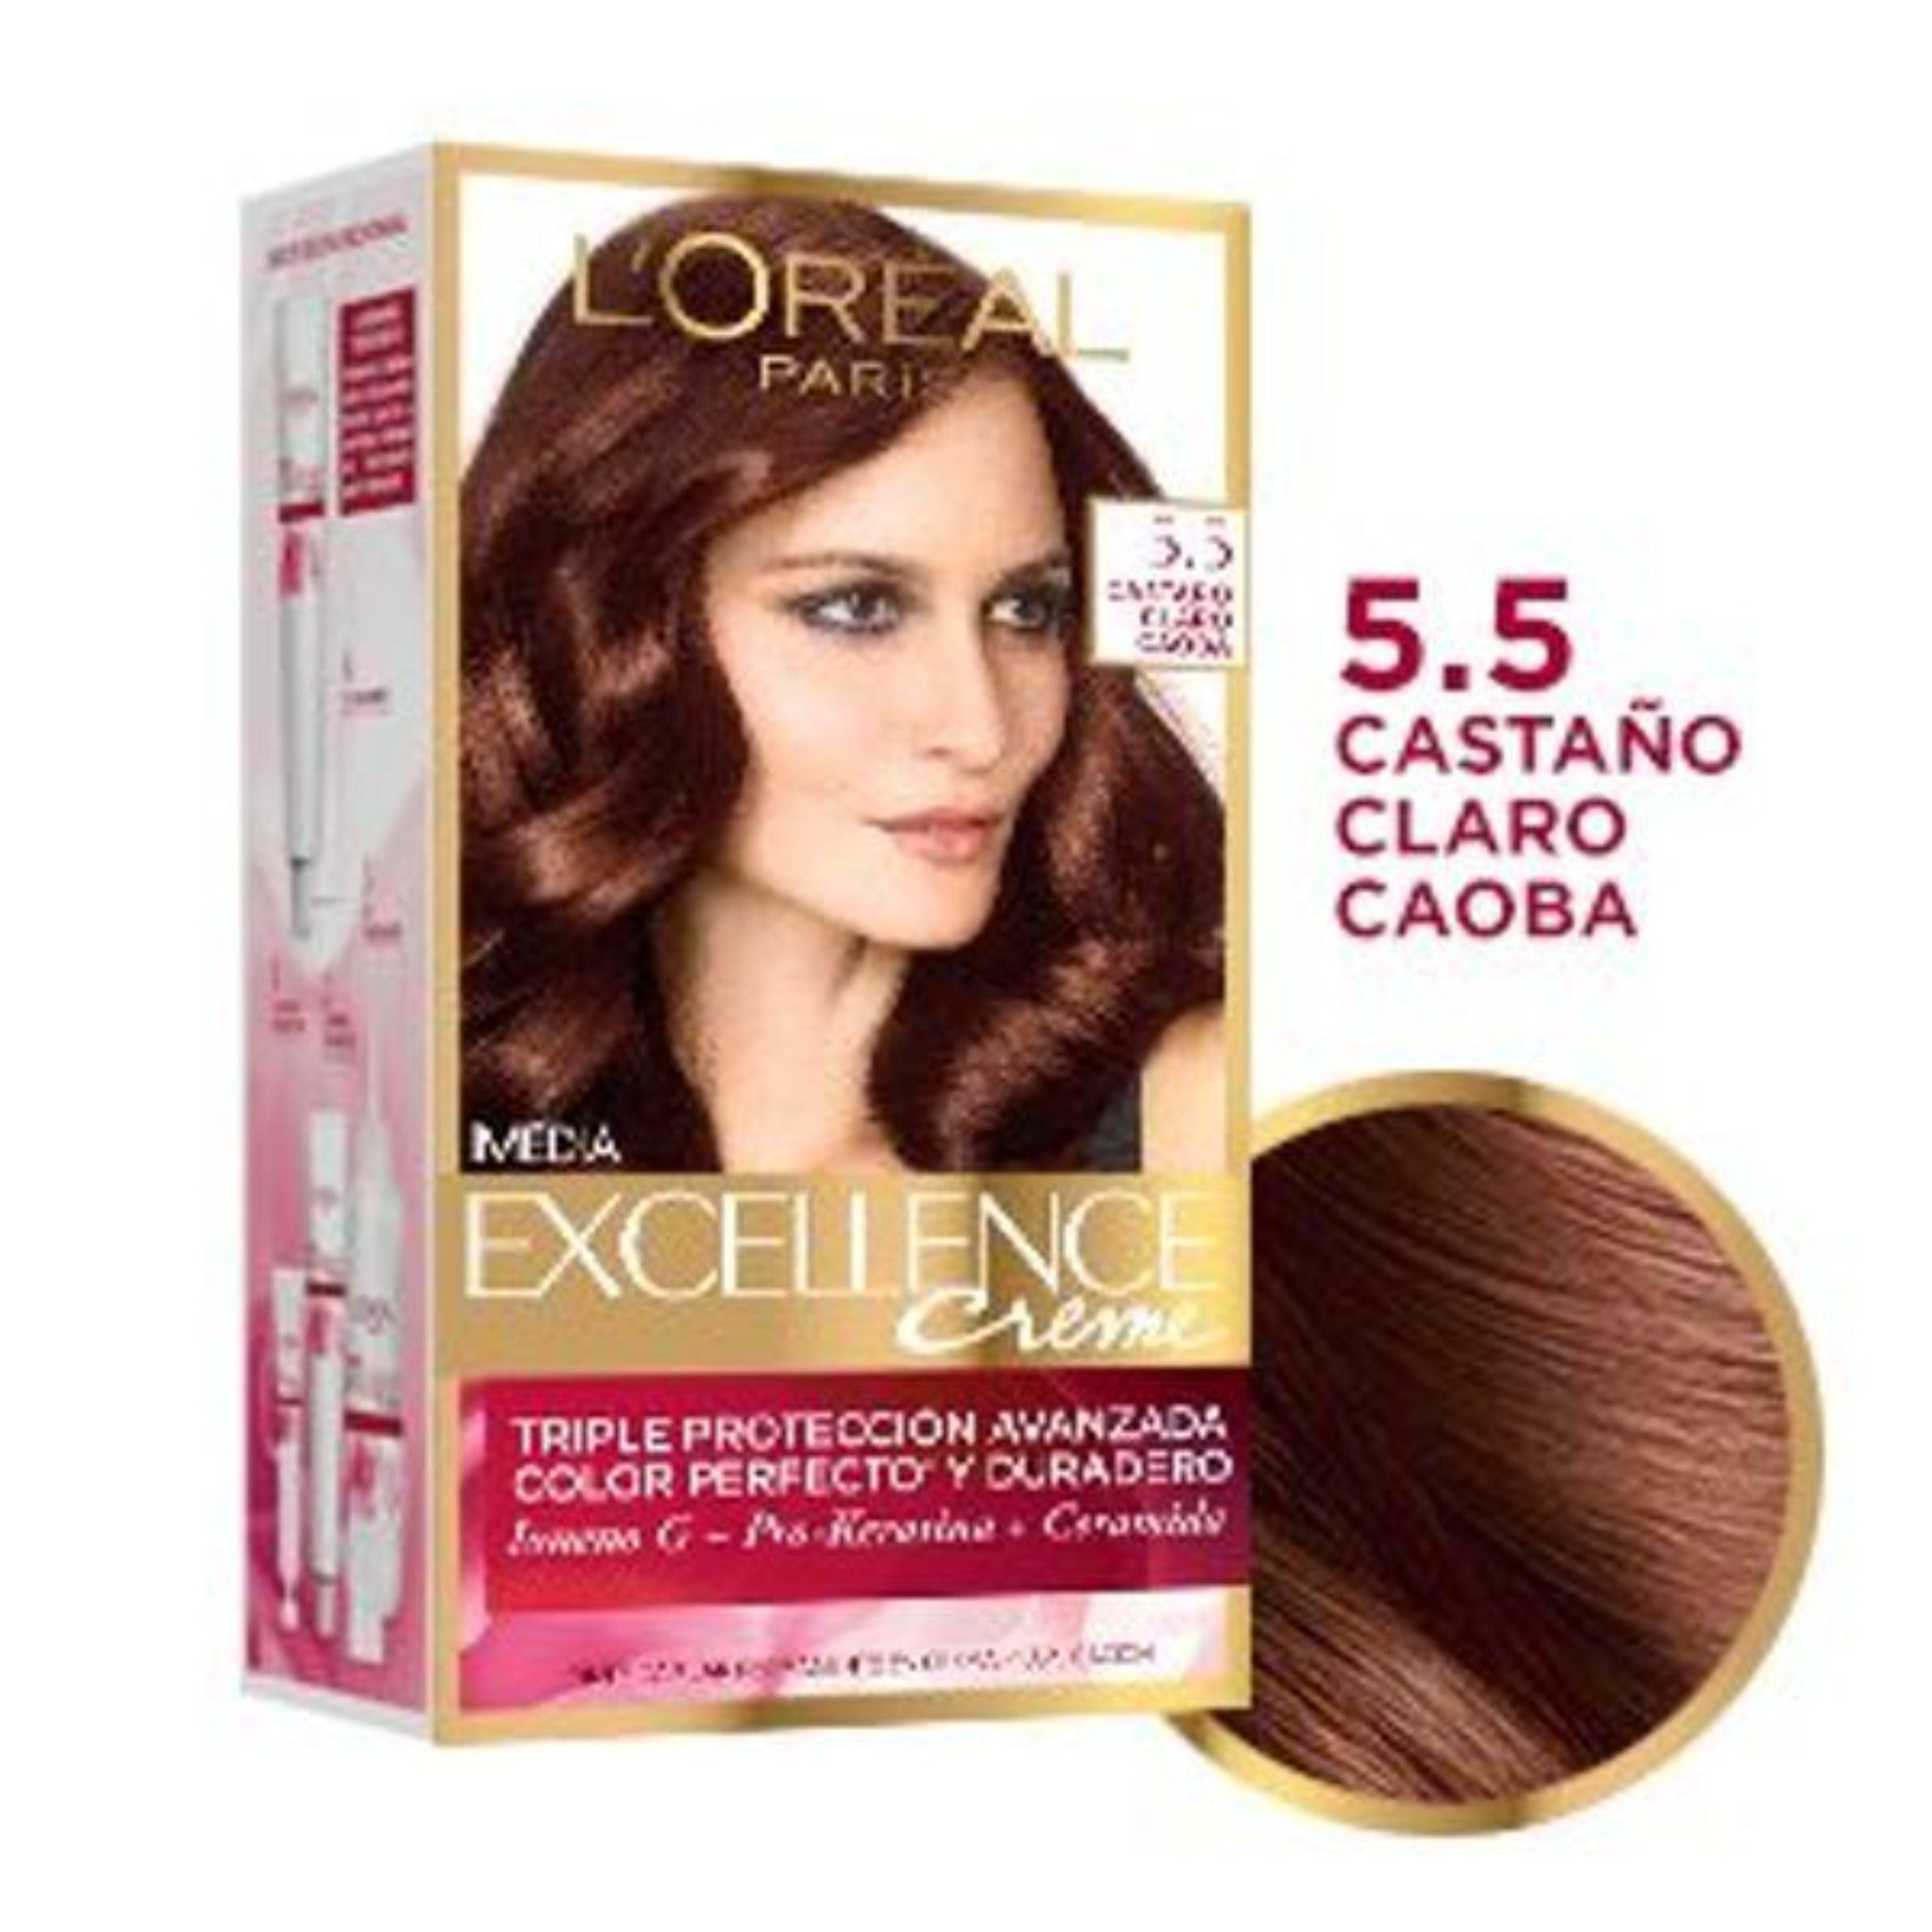 L’Oreal Excellence 5.5 Light Brown